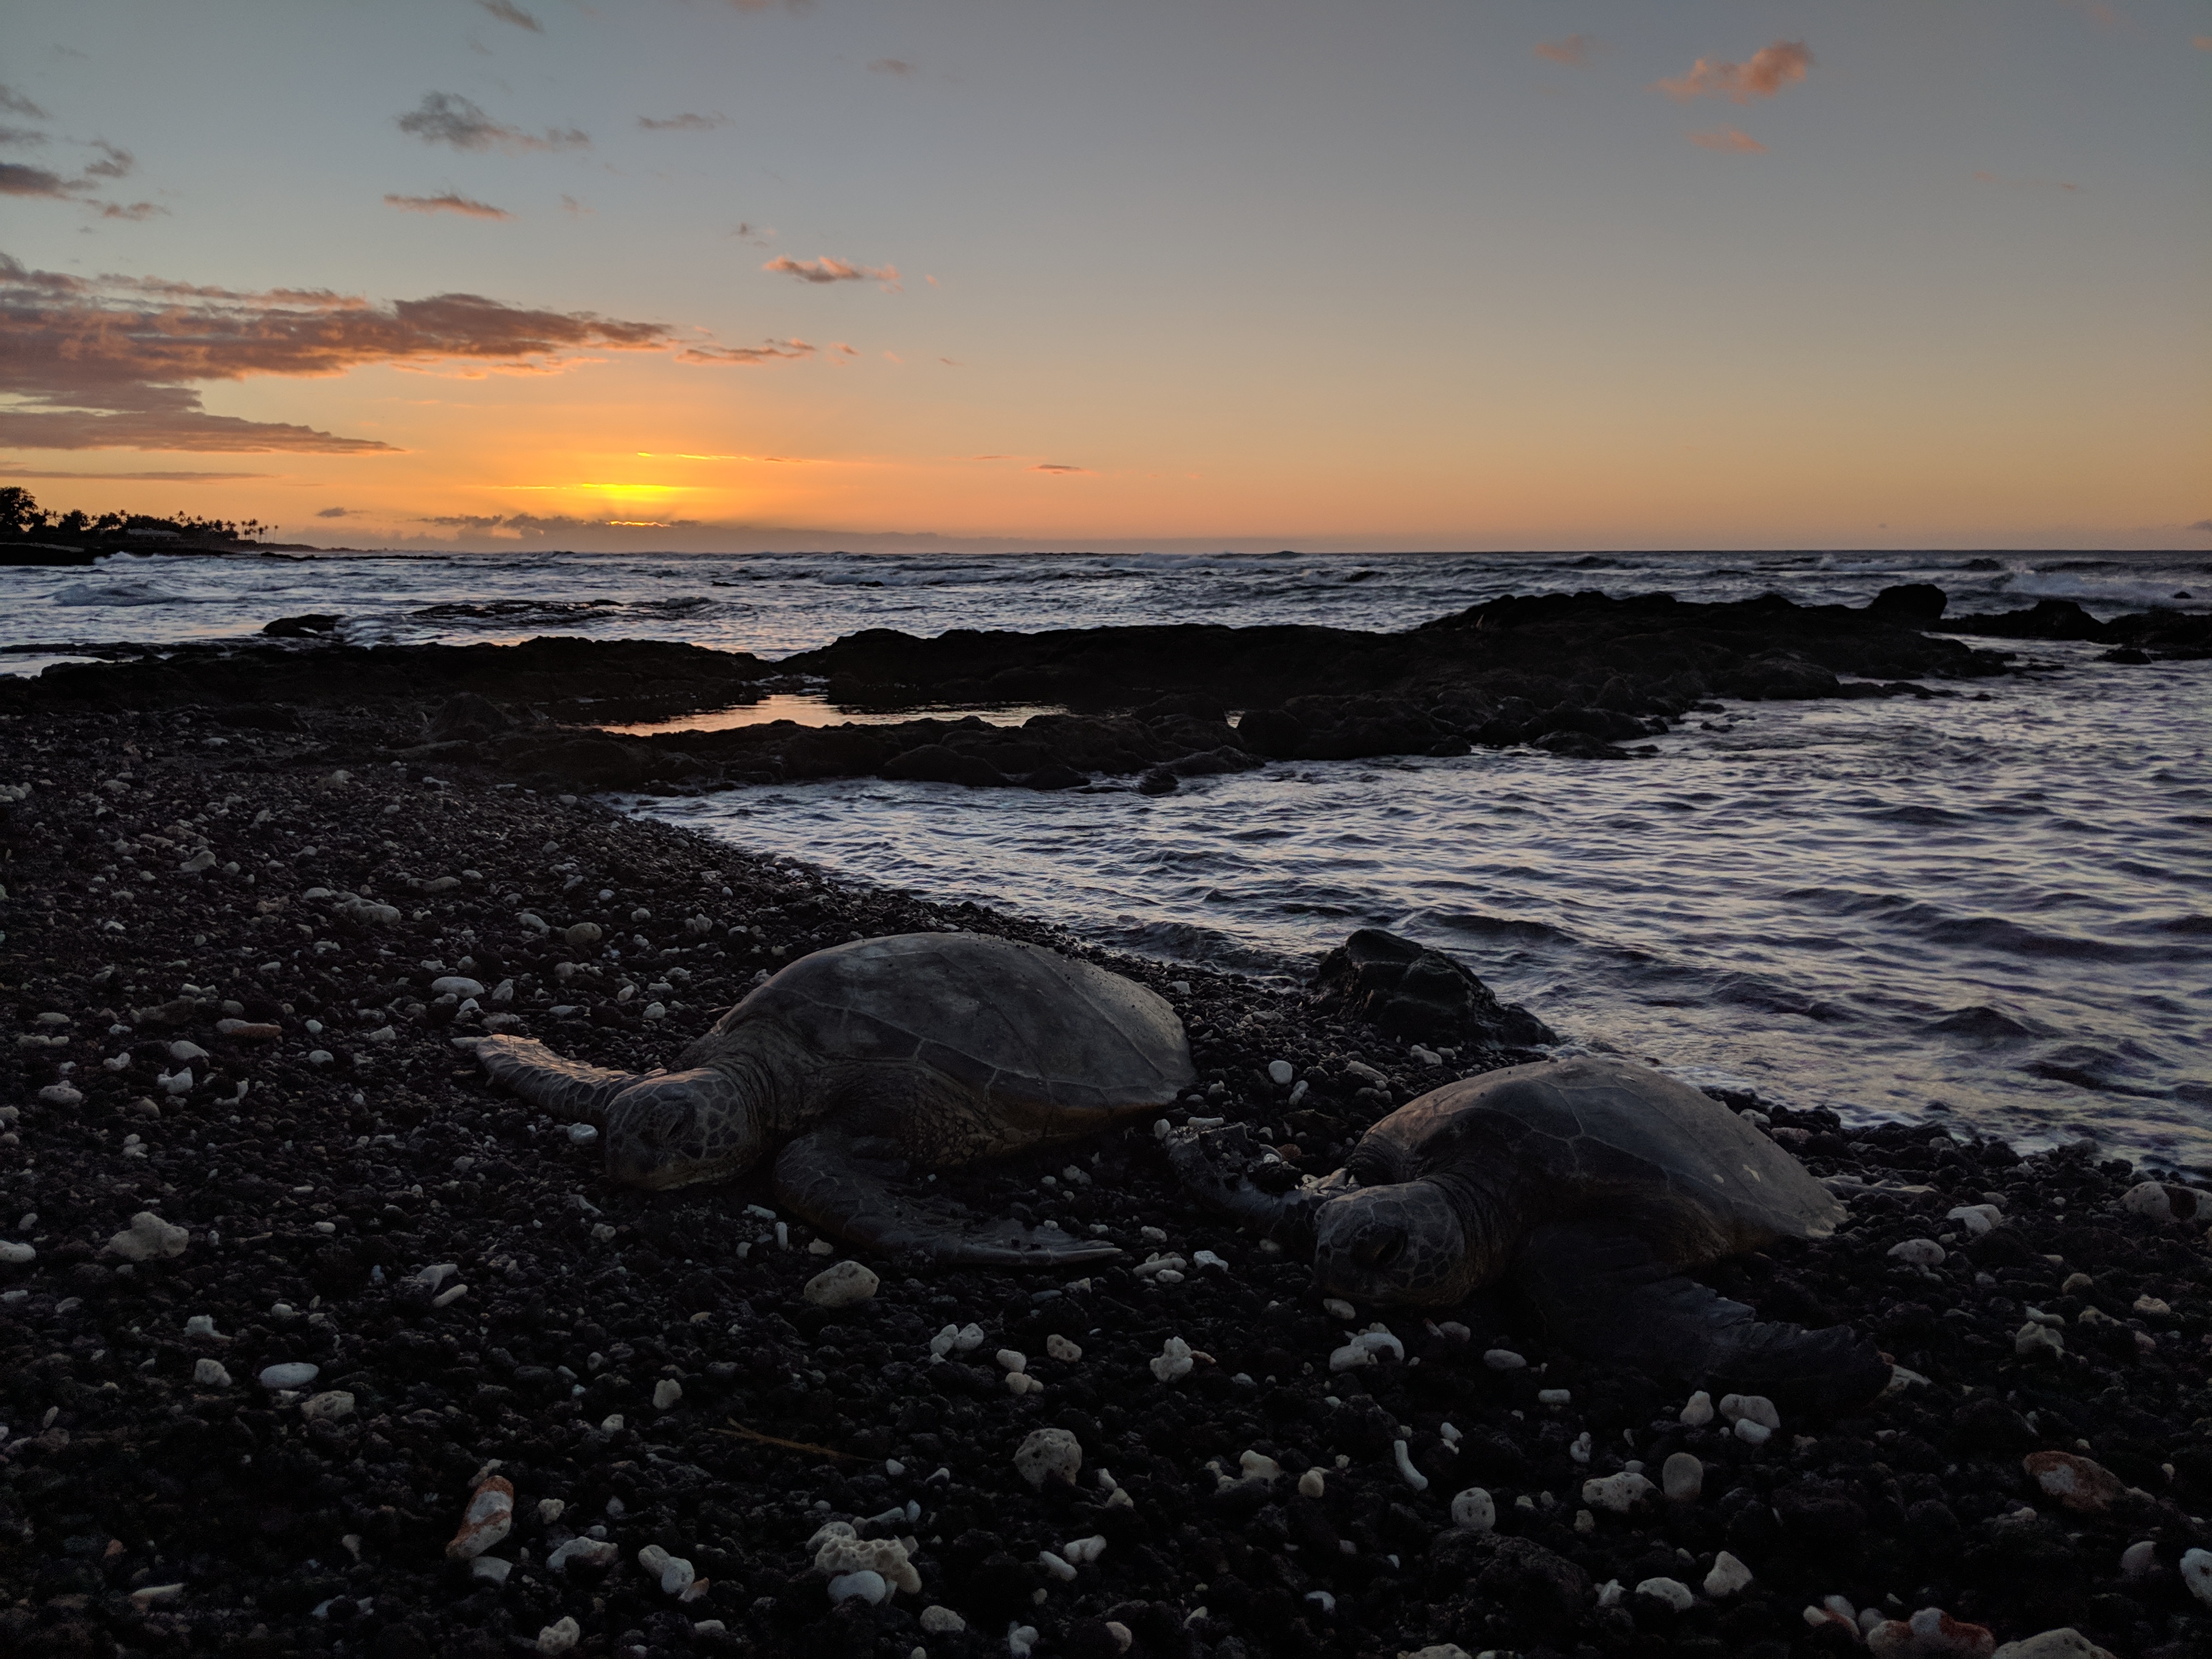 Figure 5: Sunset from the Western shore of the Big Island, Hawaii